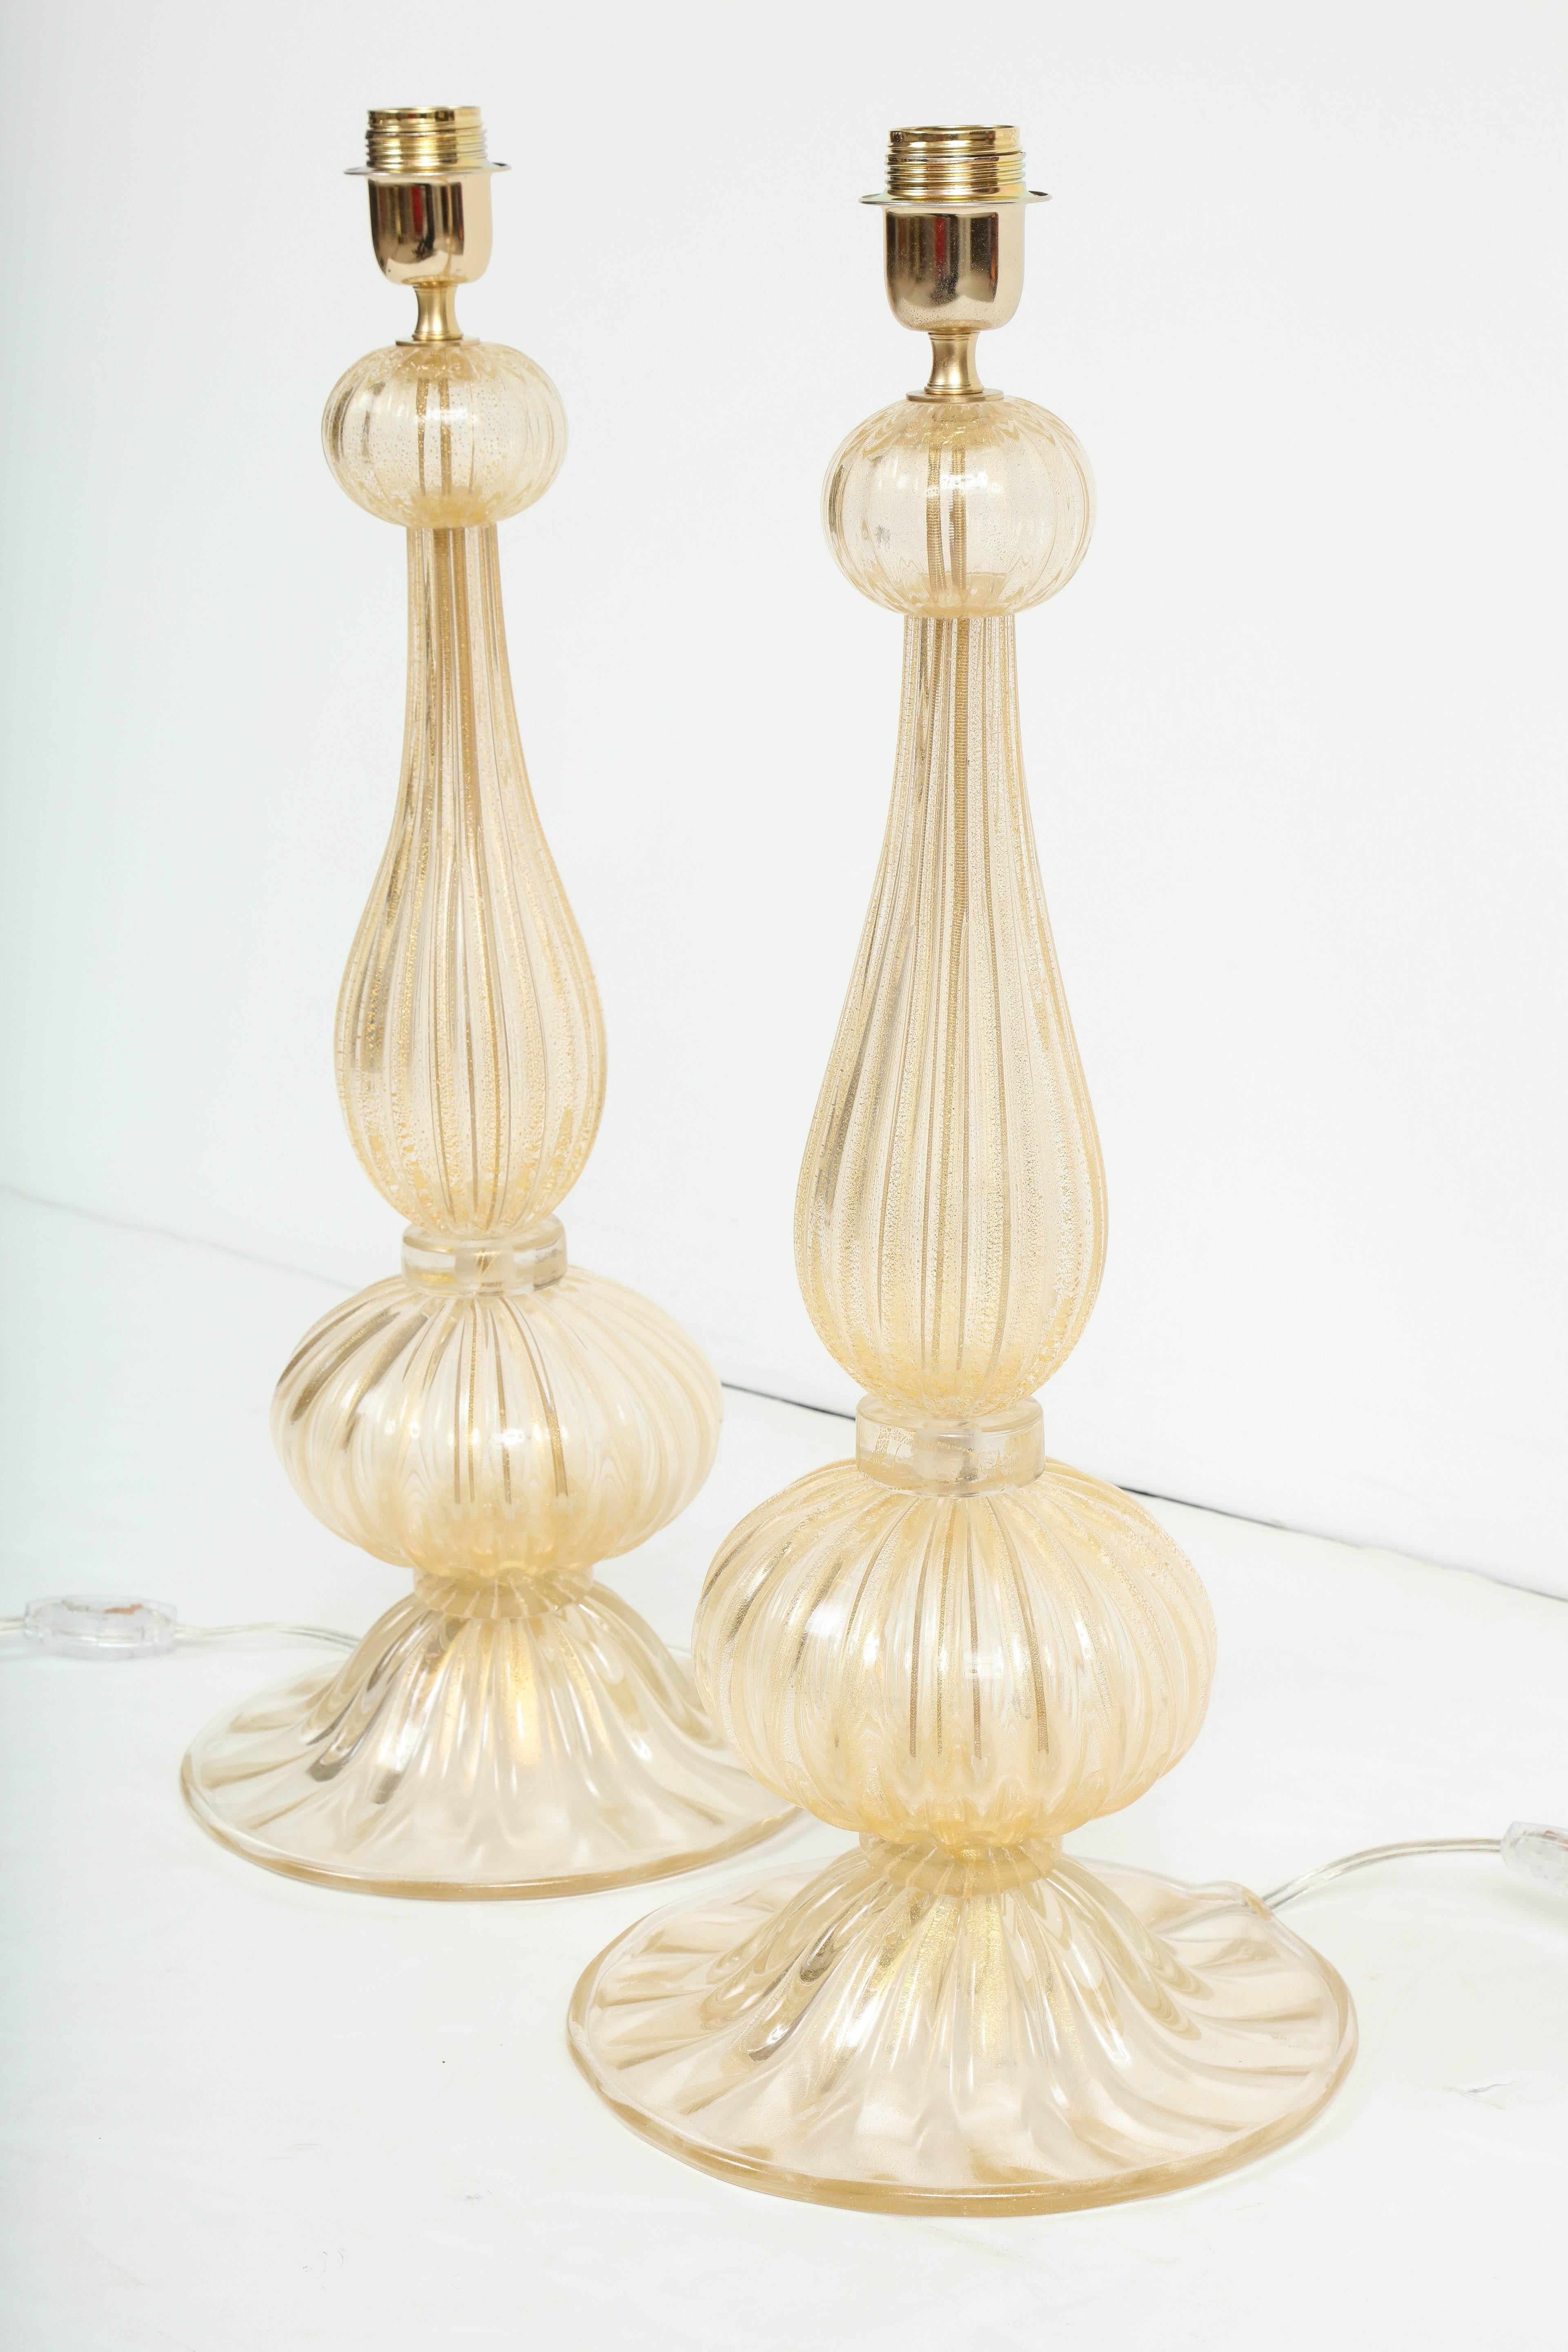 20th Century Pair of Italian Murano Ivory Infused with Gold Glass Lamps